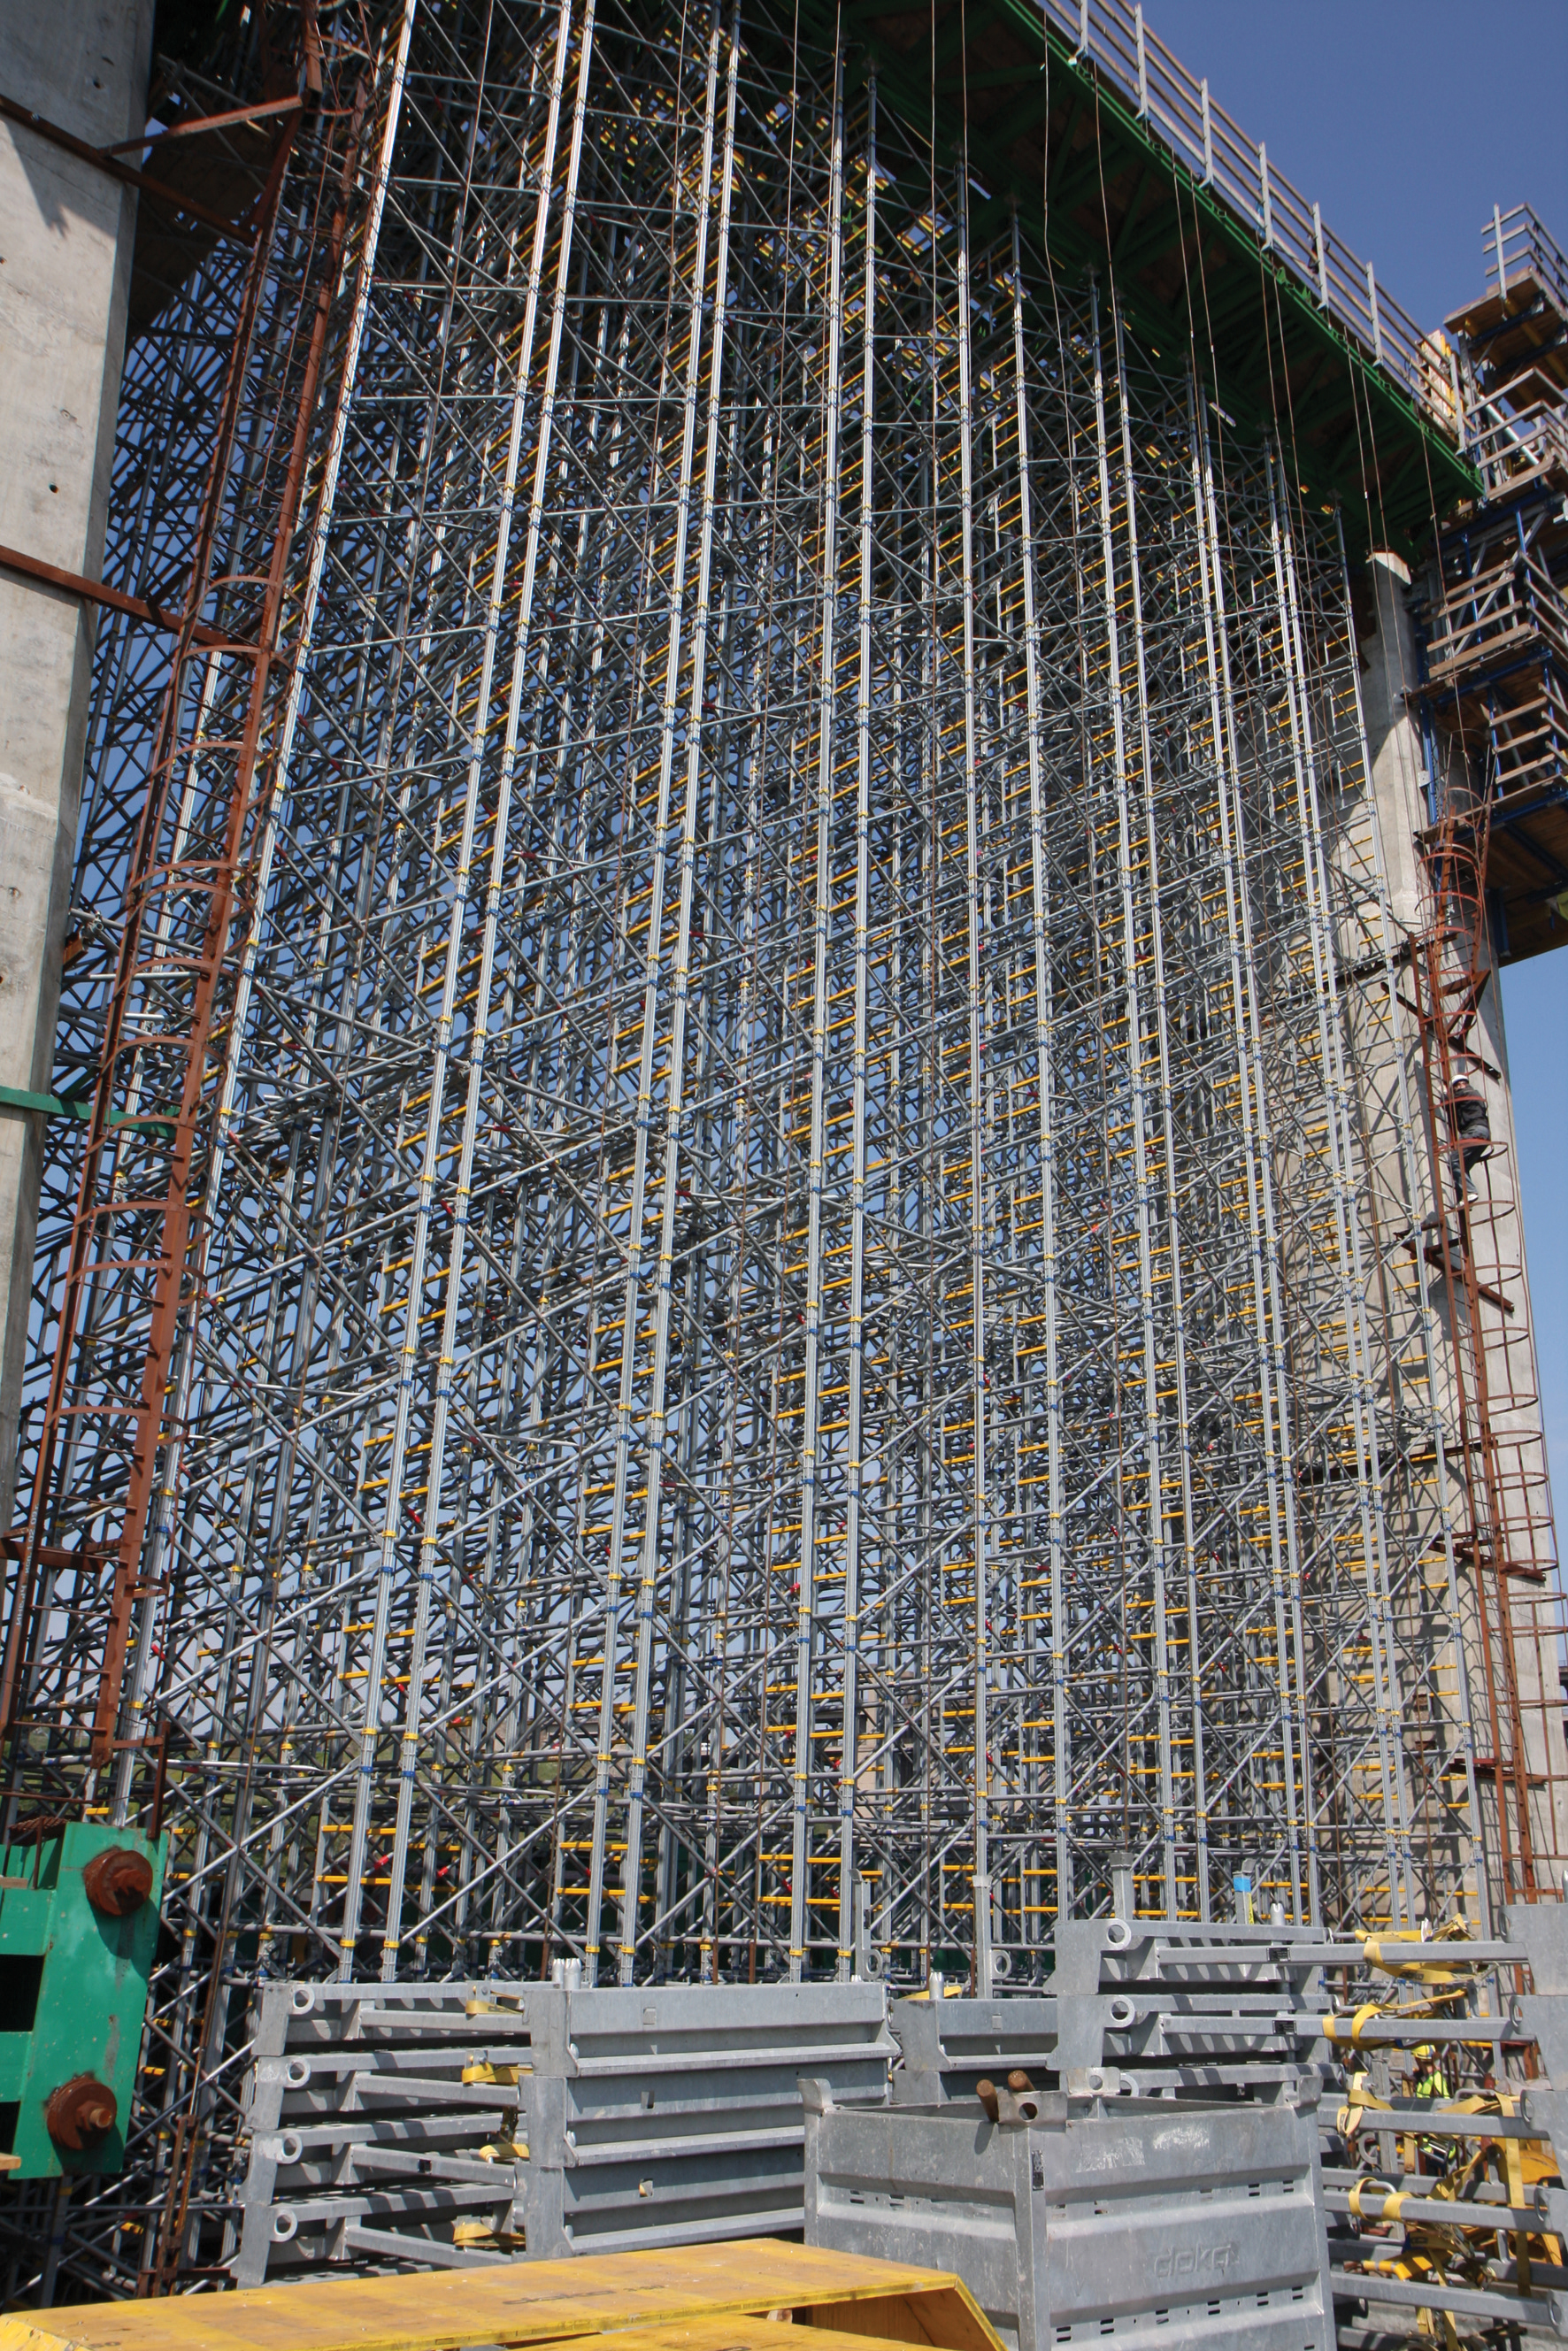 Doka formwork is being used on two suspension towers for the new multi-lane cable-stayed bridge in Zaporozhye, Ukraine